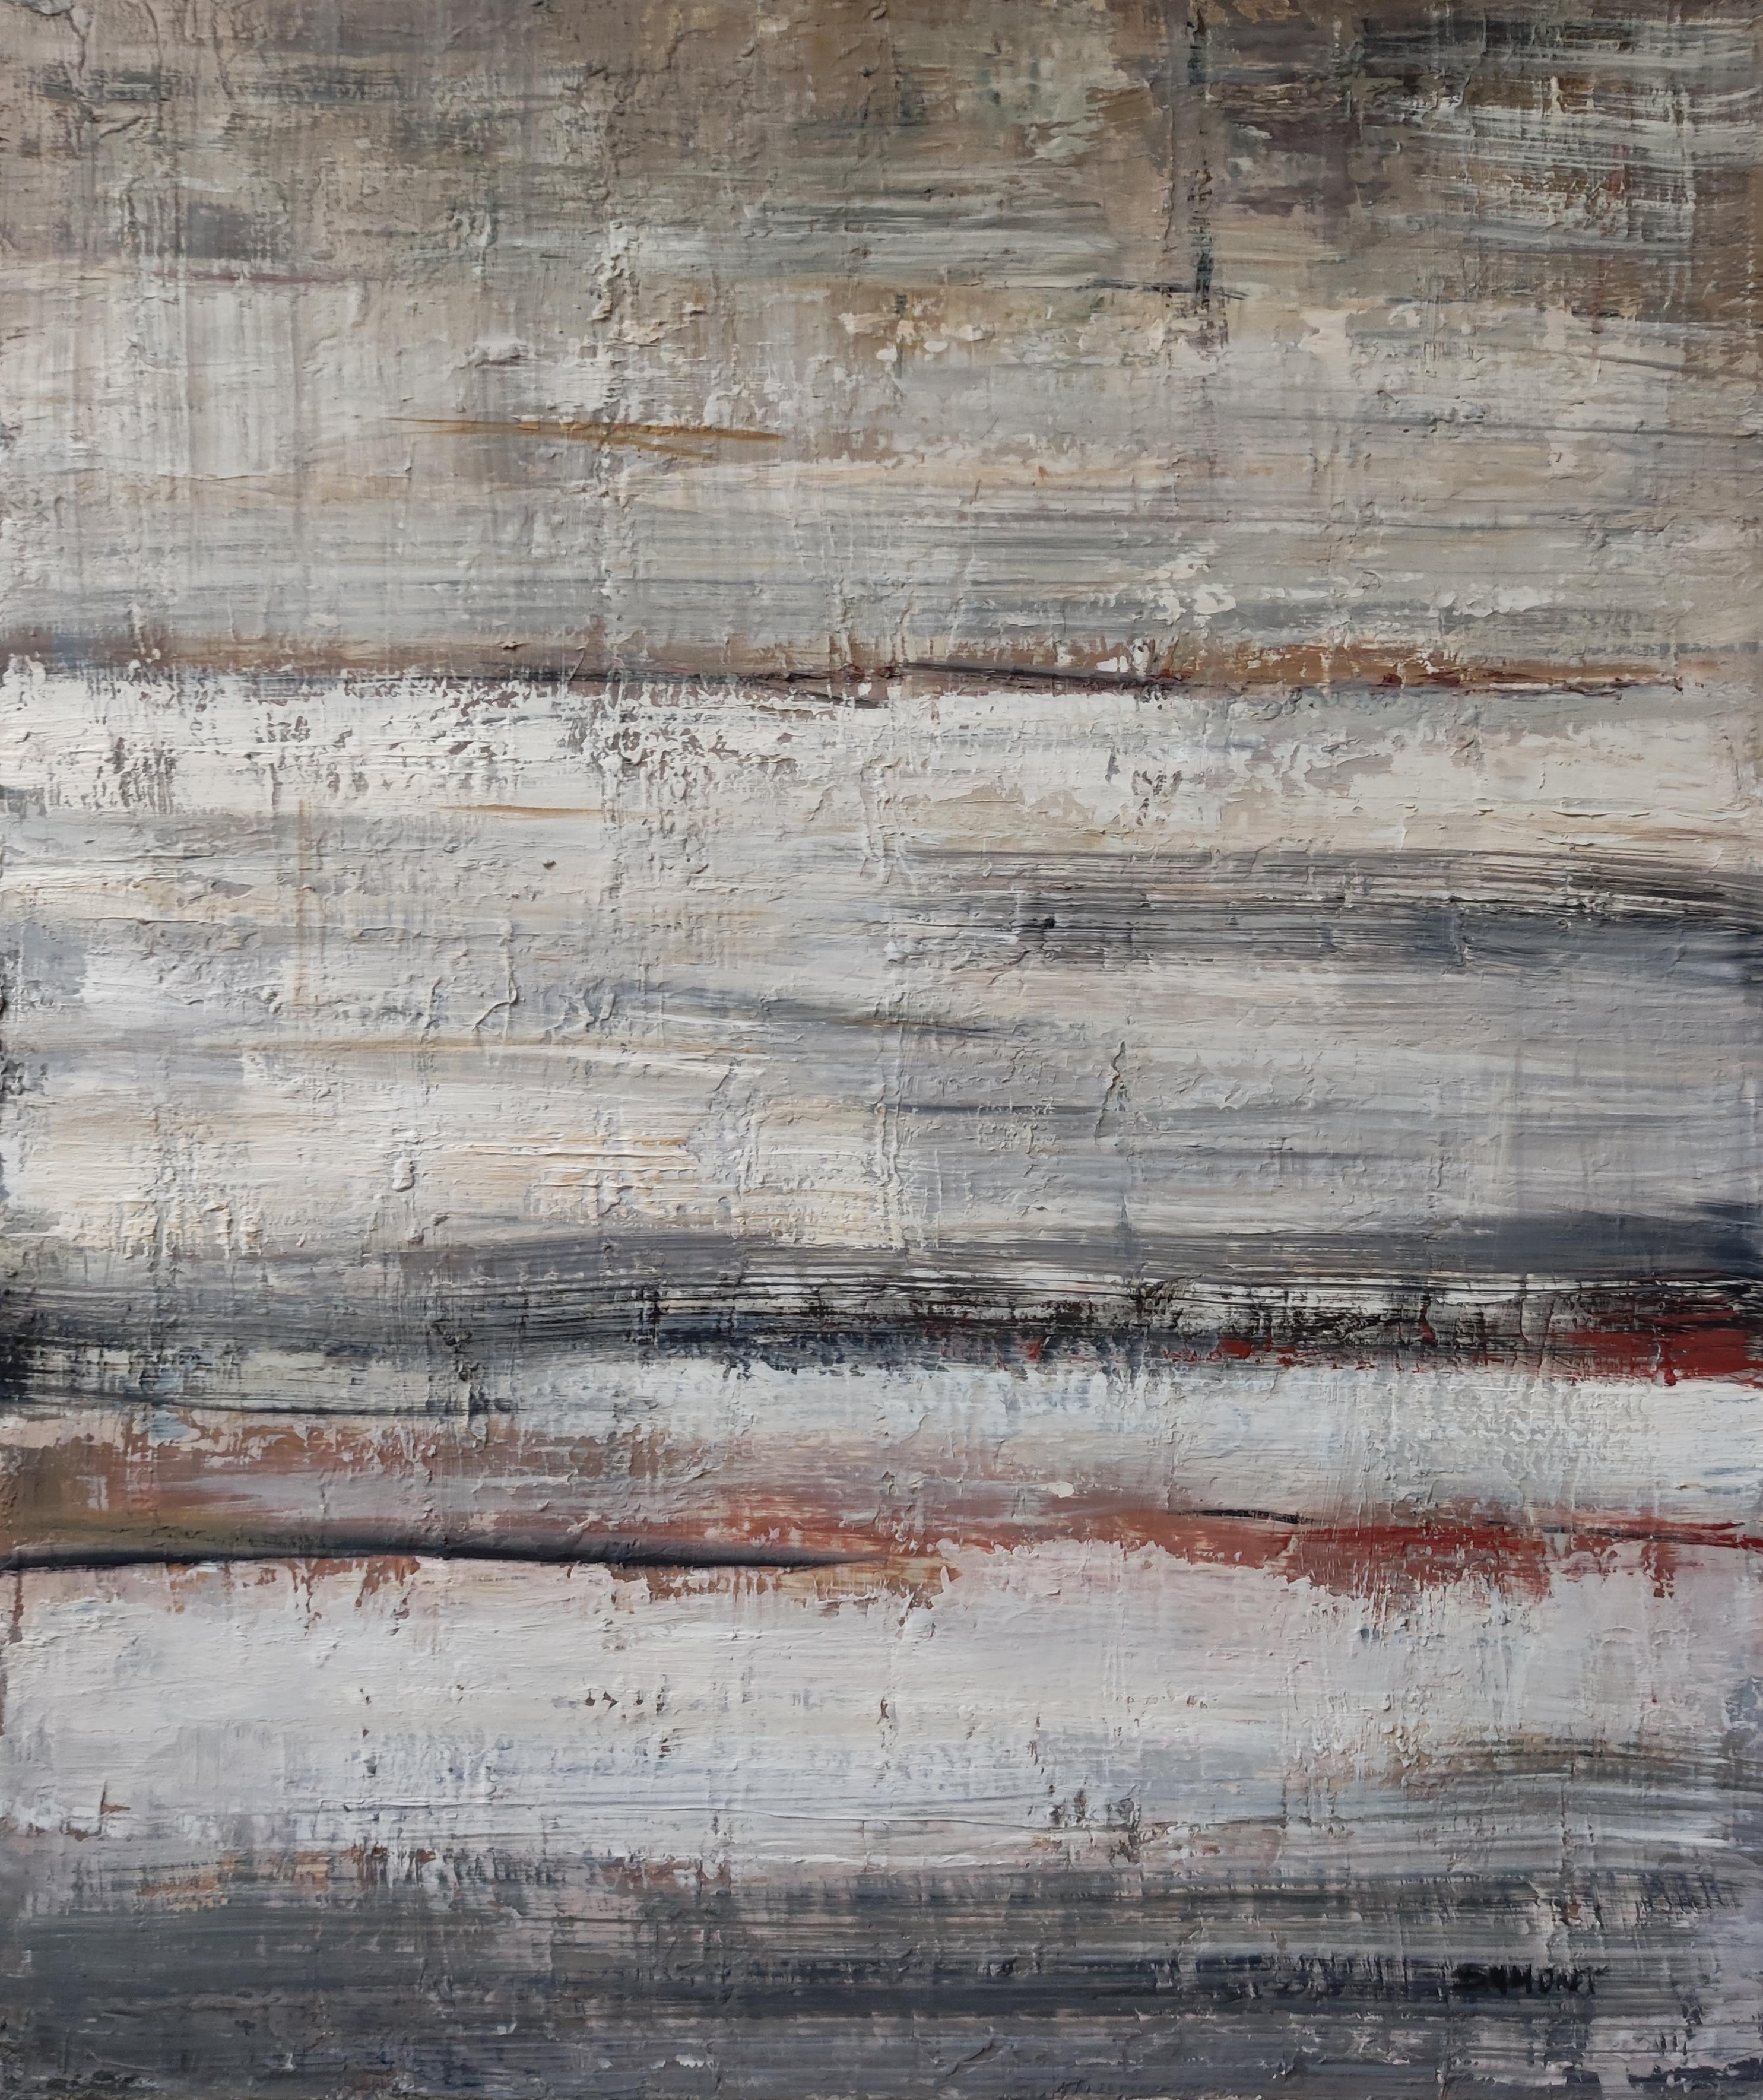 beach at low tide, oil on canvas, gray abstract, marine, contempory art, impasto - Abstract Painting by SOPHIE DUMONT